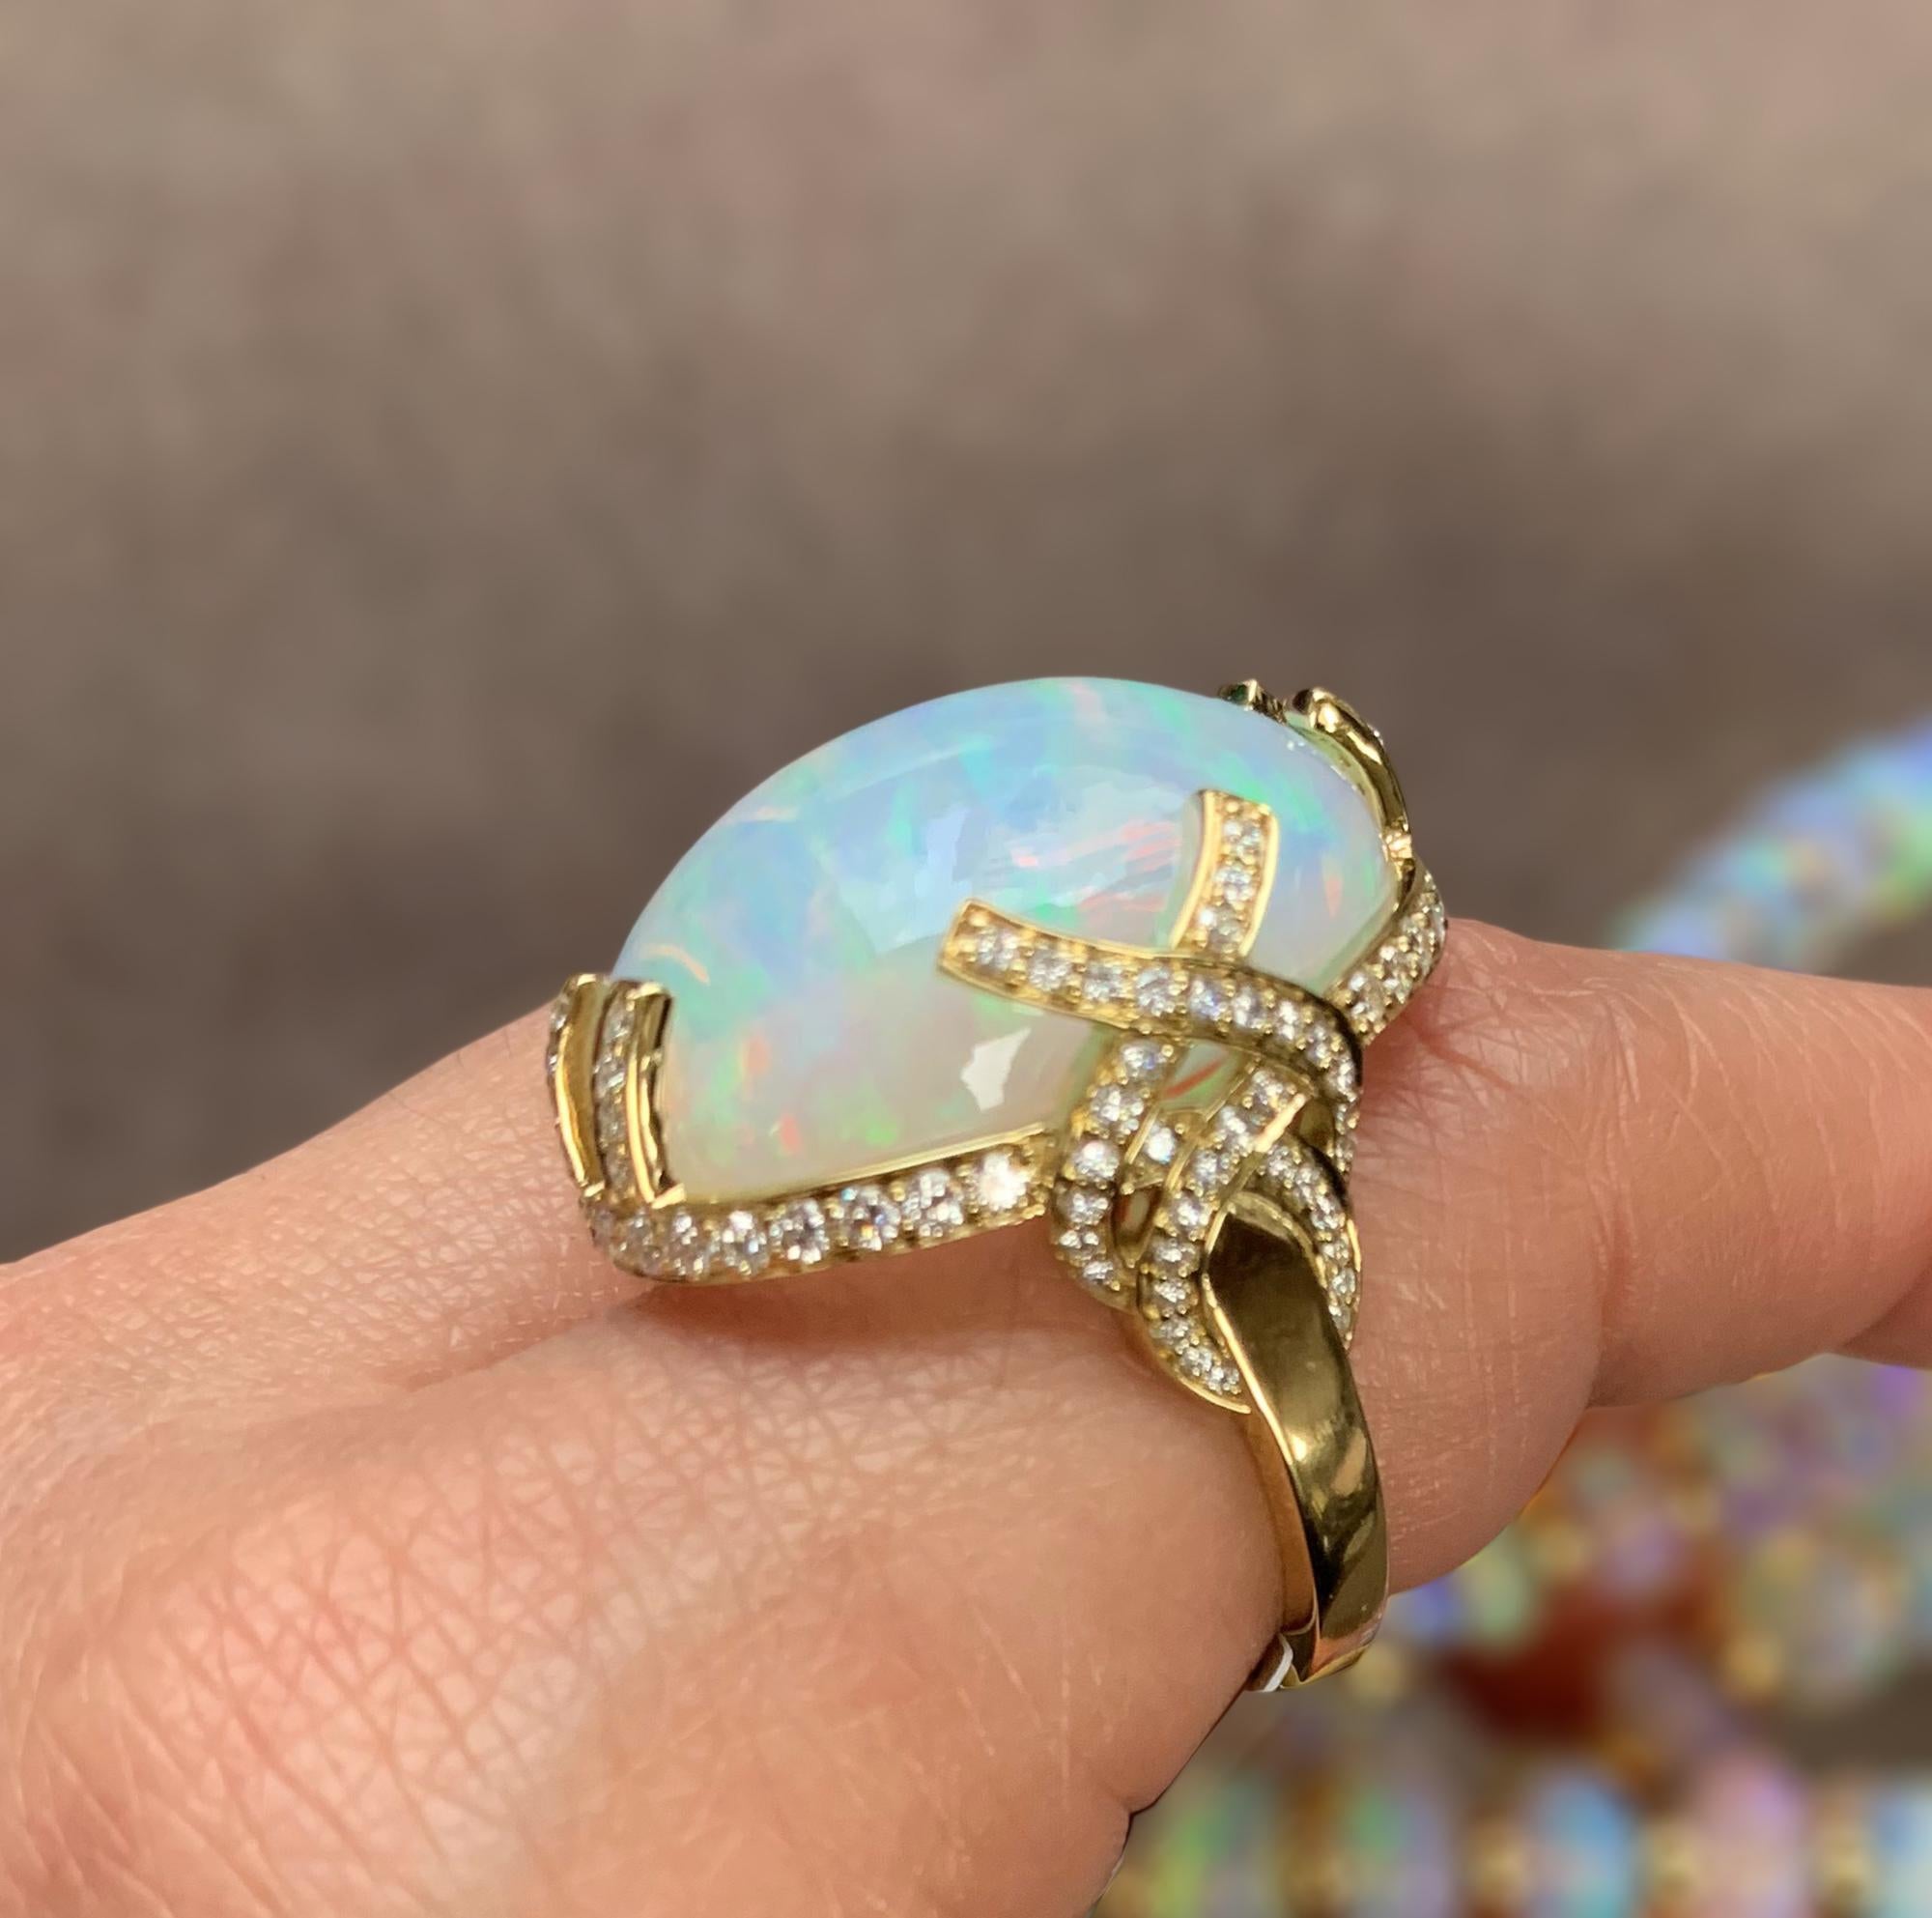 Greenish Medium Opal Oval Cabochon Ring With Diamonds in 18K Yellow Gold, from 'G-One' Collection    

Stone Size: 24 x 18 mm

Gemstone Approx Wt: 25.04 Carats

Diamonds: G-H / VS, Approx. Wt: 1.01 Carats